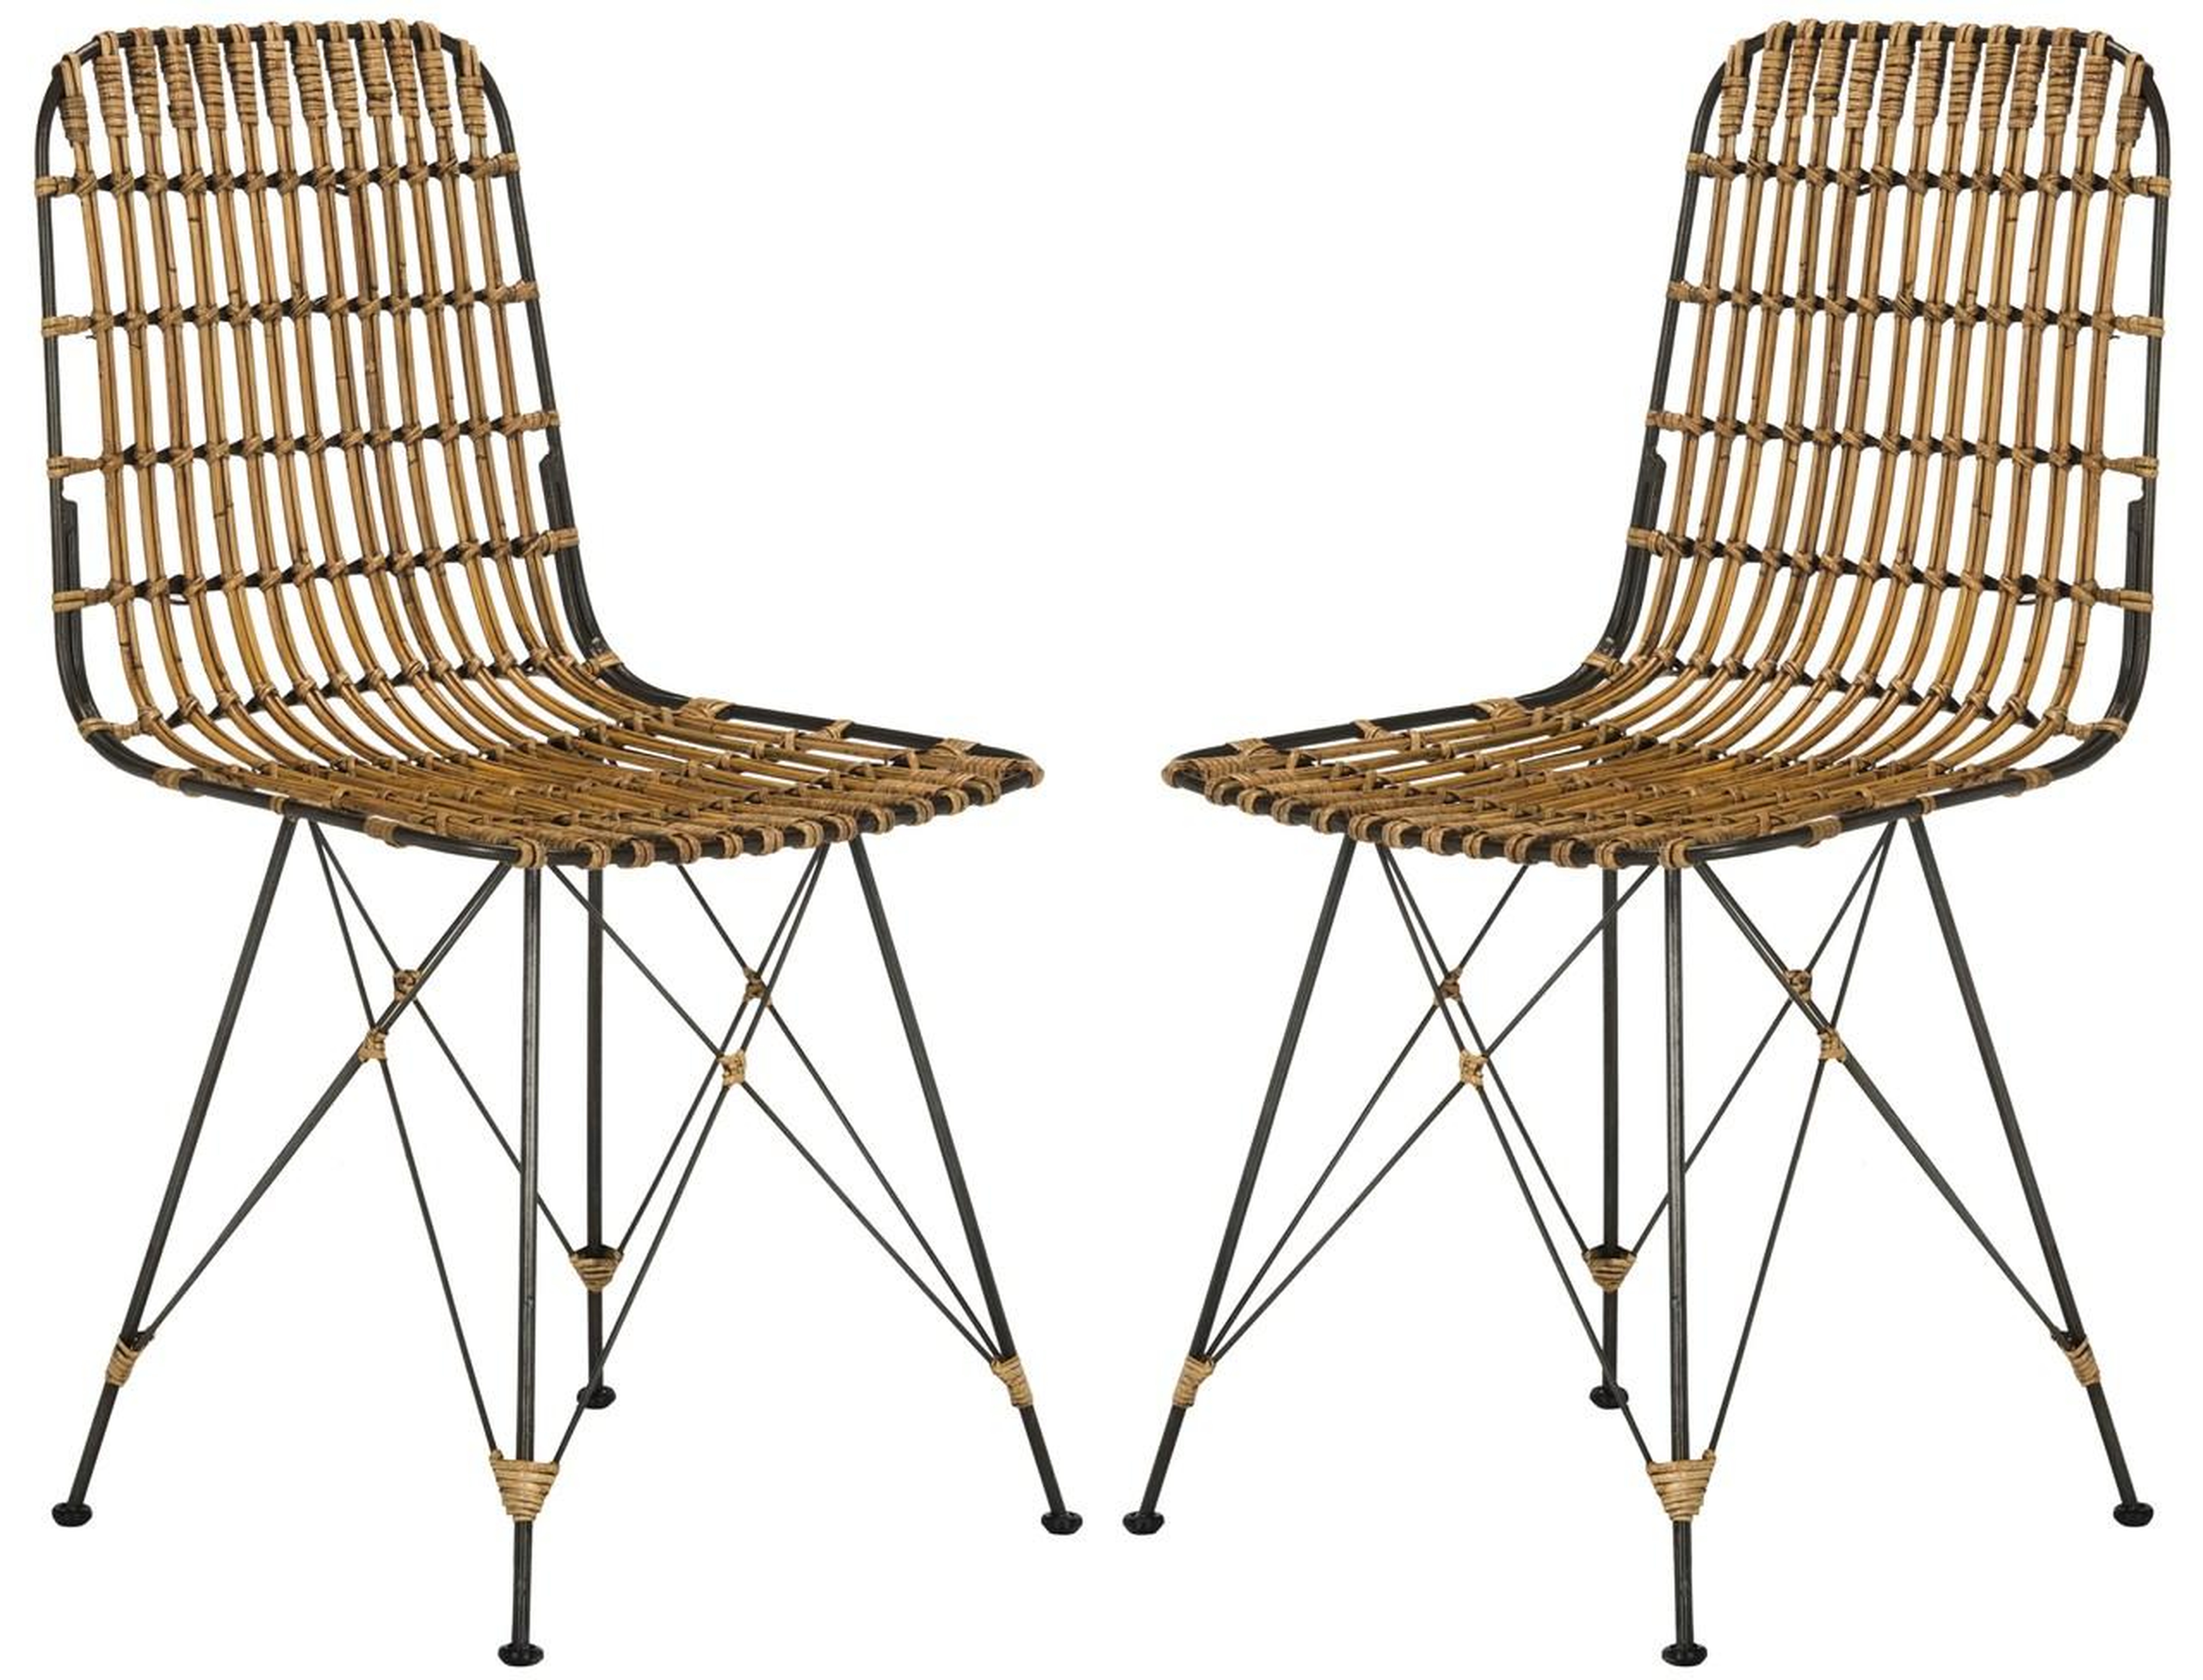 Minerva Wicker Dining Chair (Set of 2) - Natural Brown Wash - Arlo Home - Arlo Home